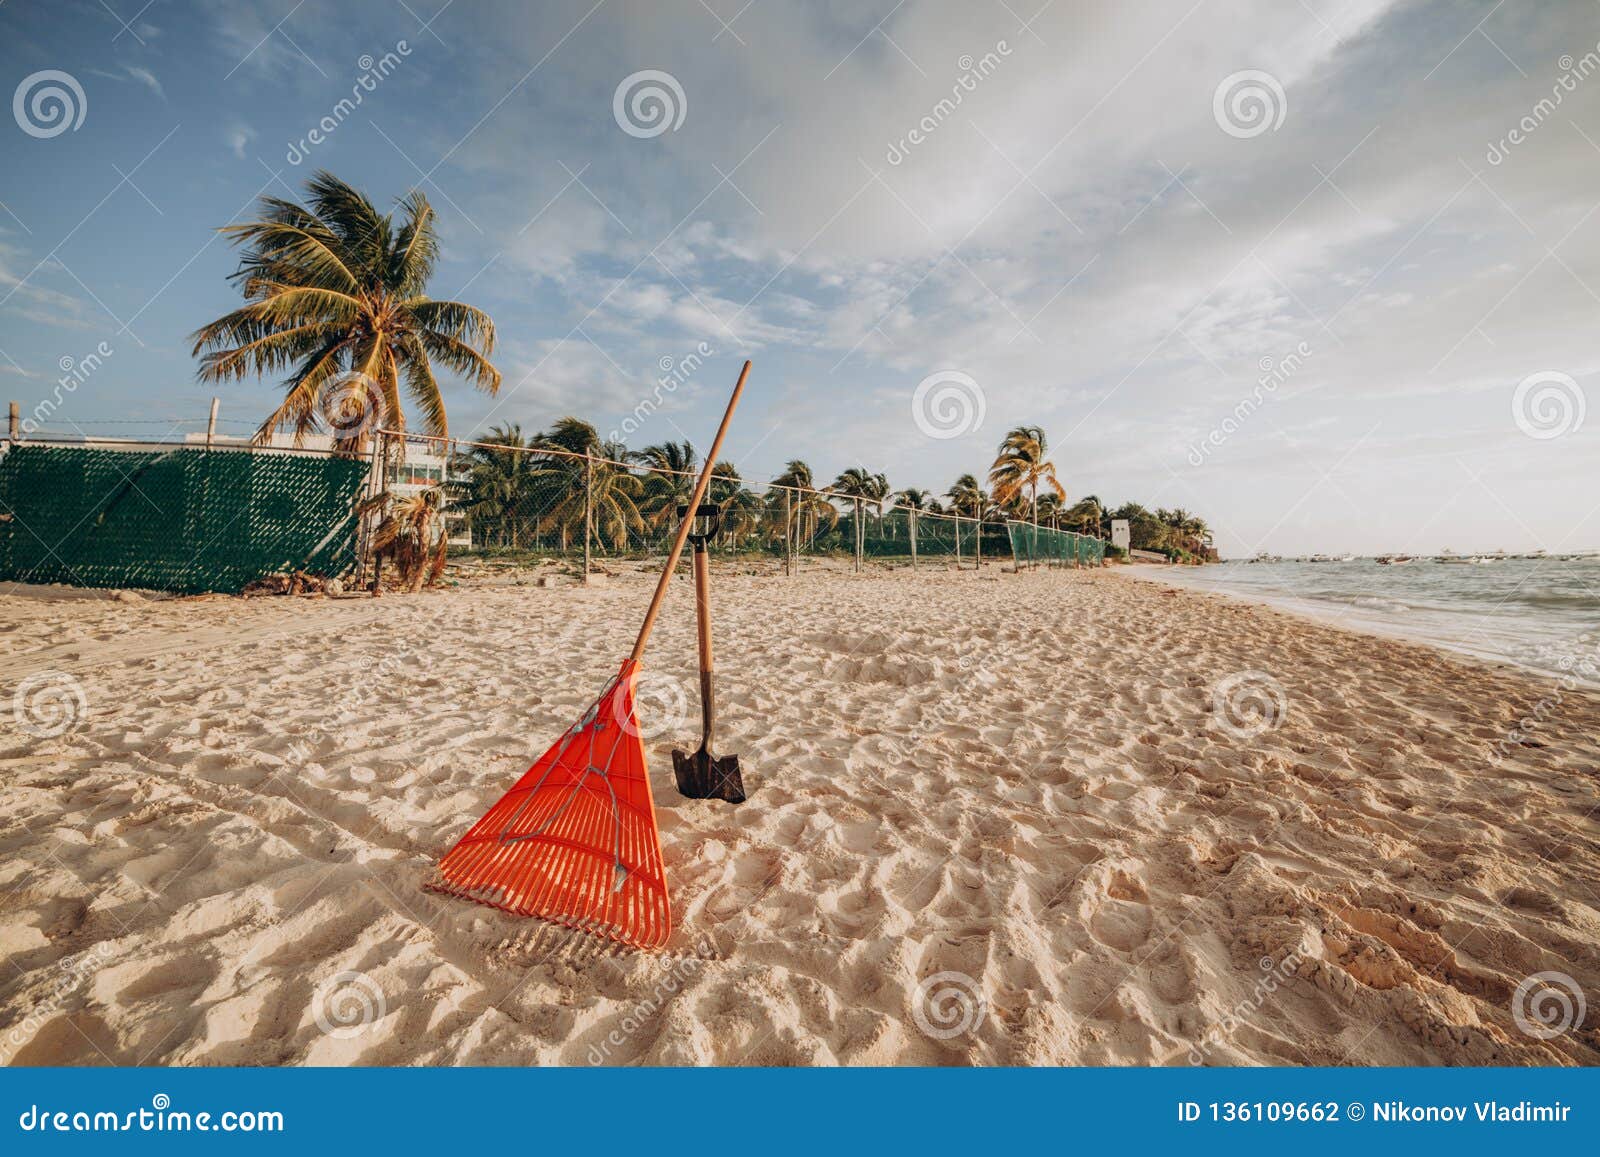 Tools for Cleaning the Beach. Rake and Shovel on Sand Stock Photo - Image  of resort, outdoor: 136109662